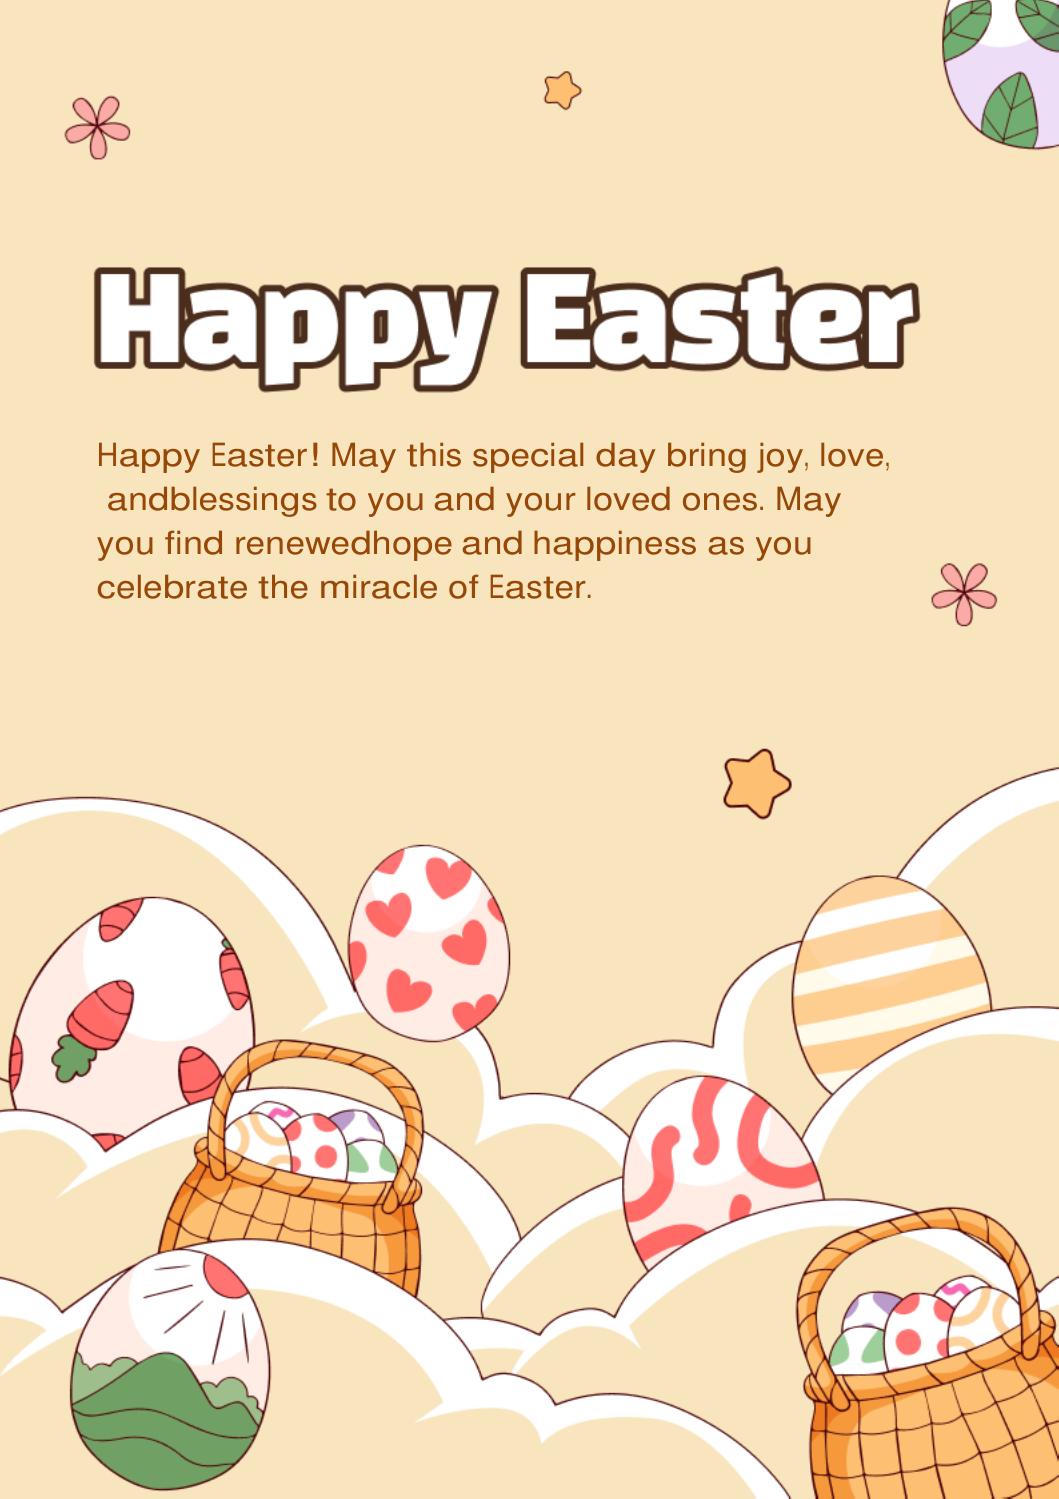 10 Christian Easter Card Messages